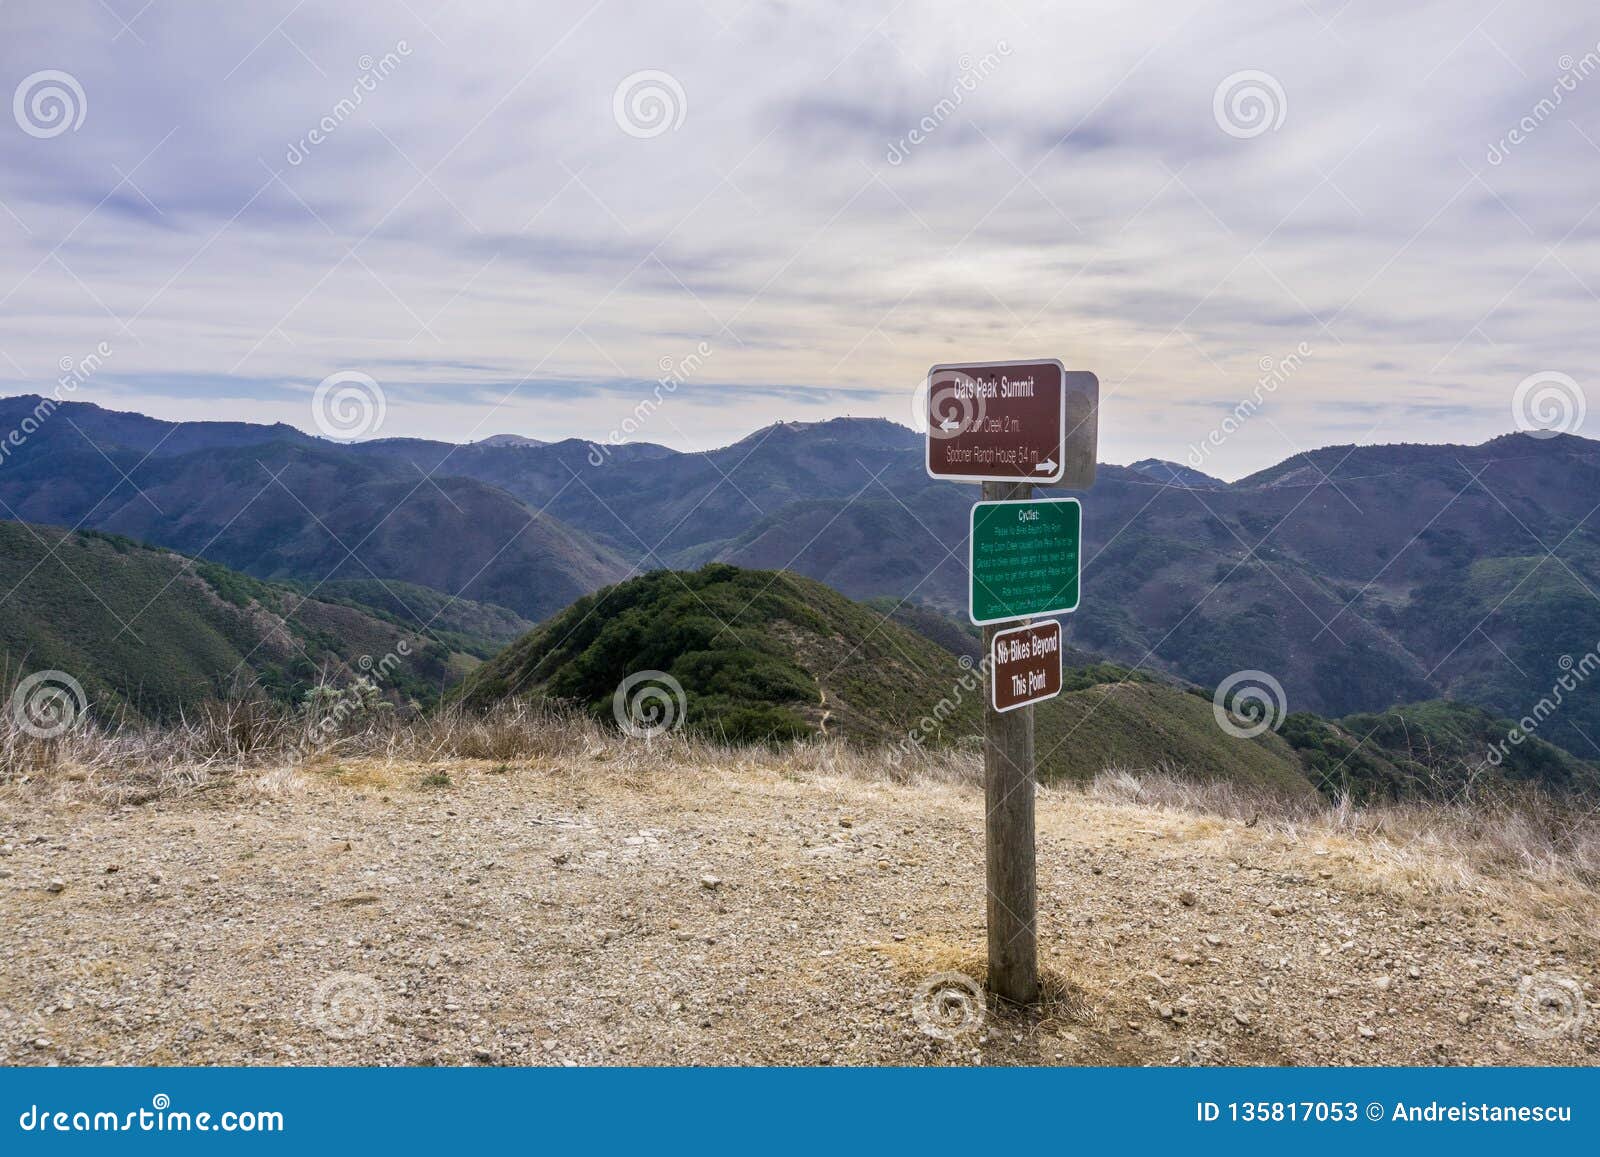 posted signs showing distances and directions and other notices in montana de oro state park placed on oats peak, one of the